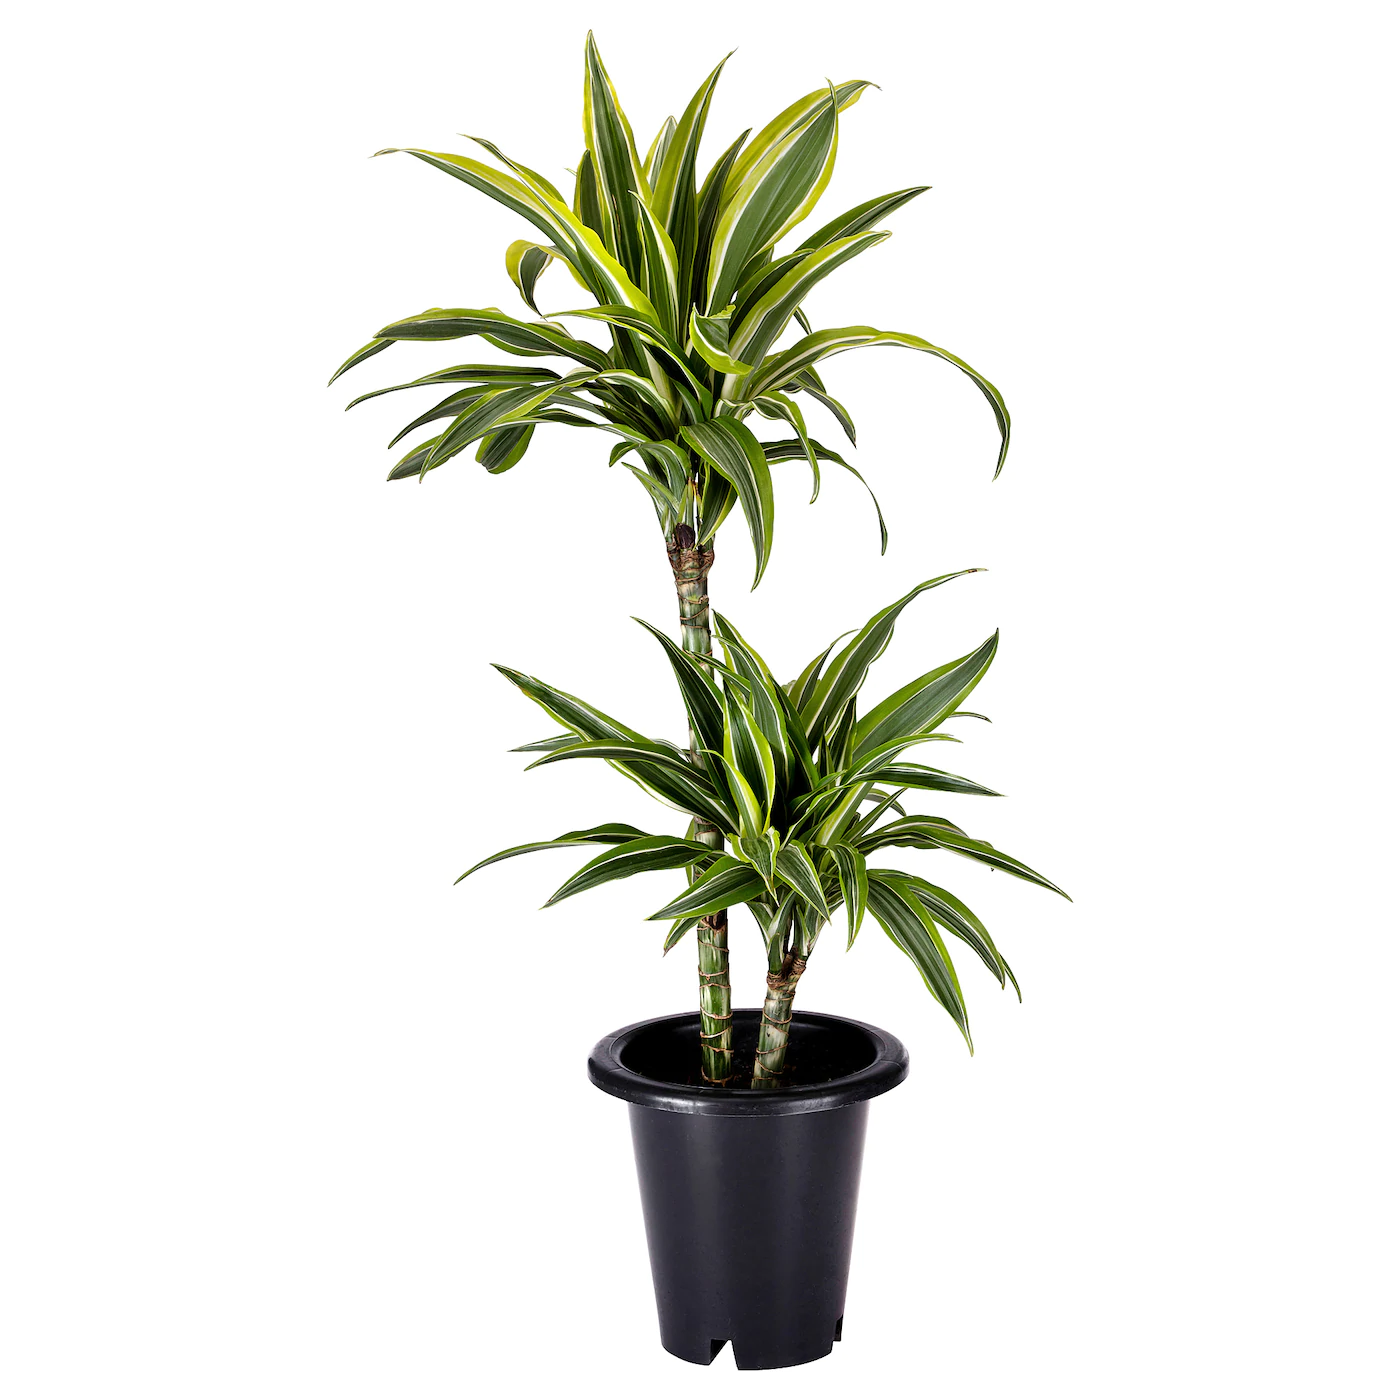 The 5 best houseplants for removing indoor air pollution - 45